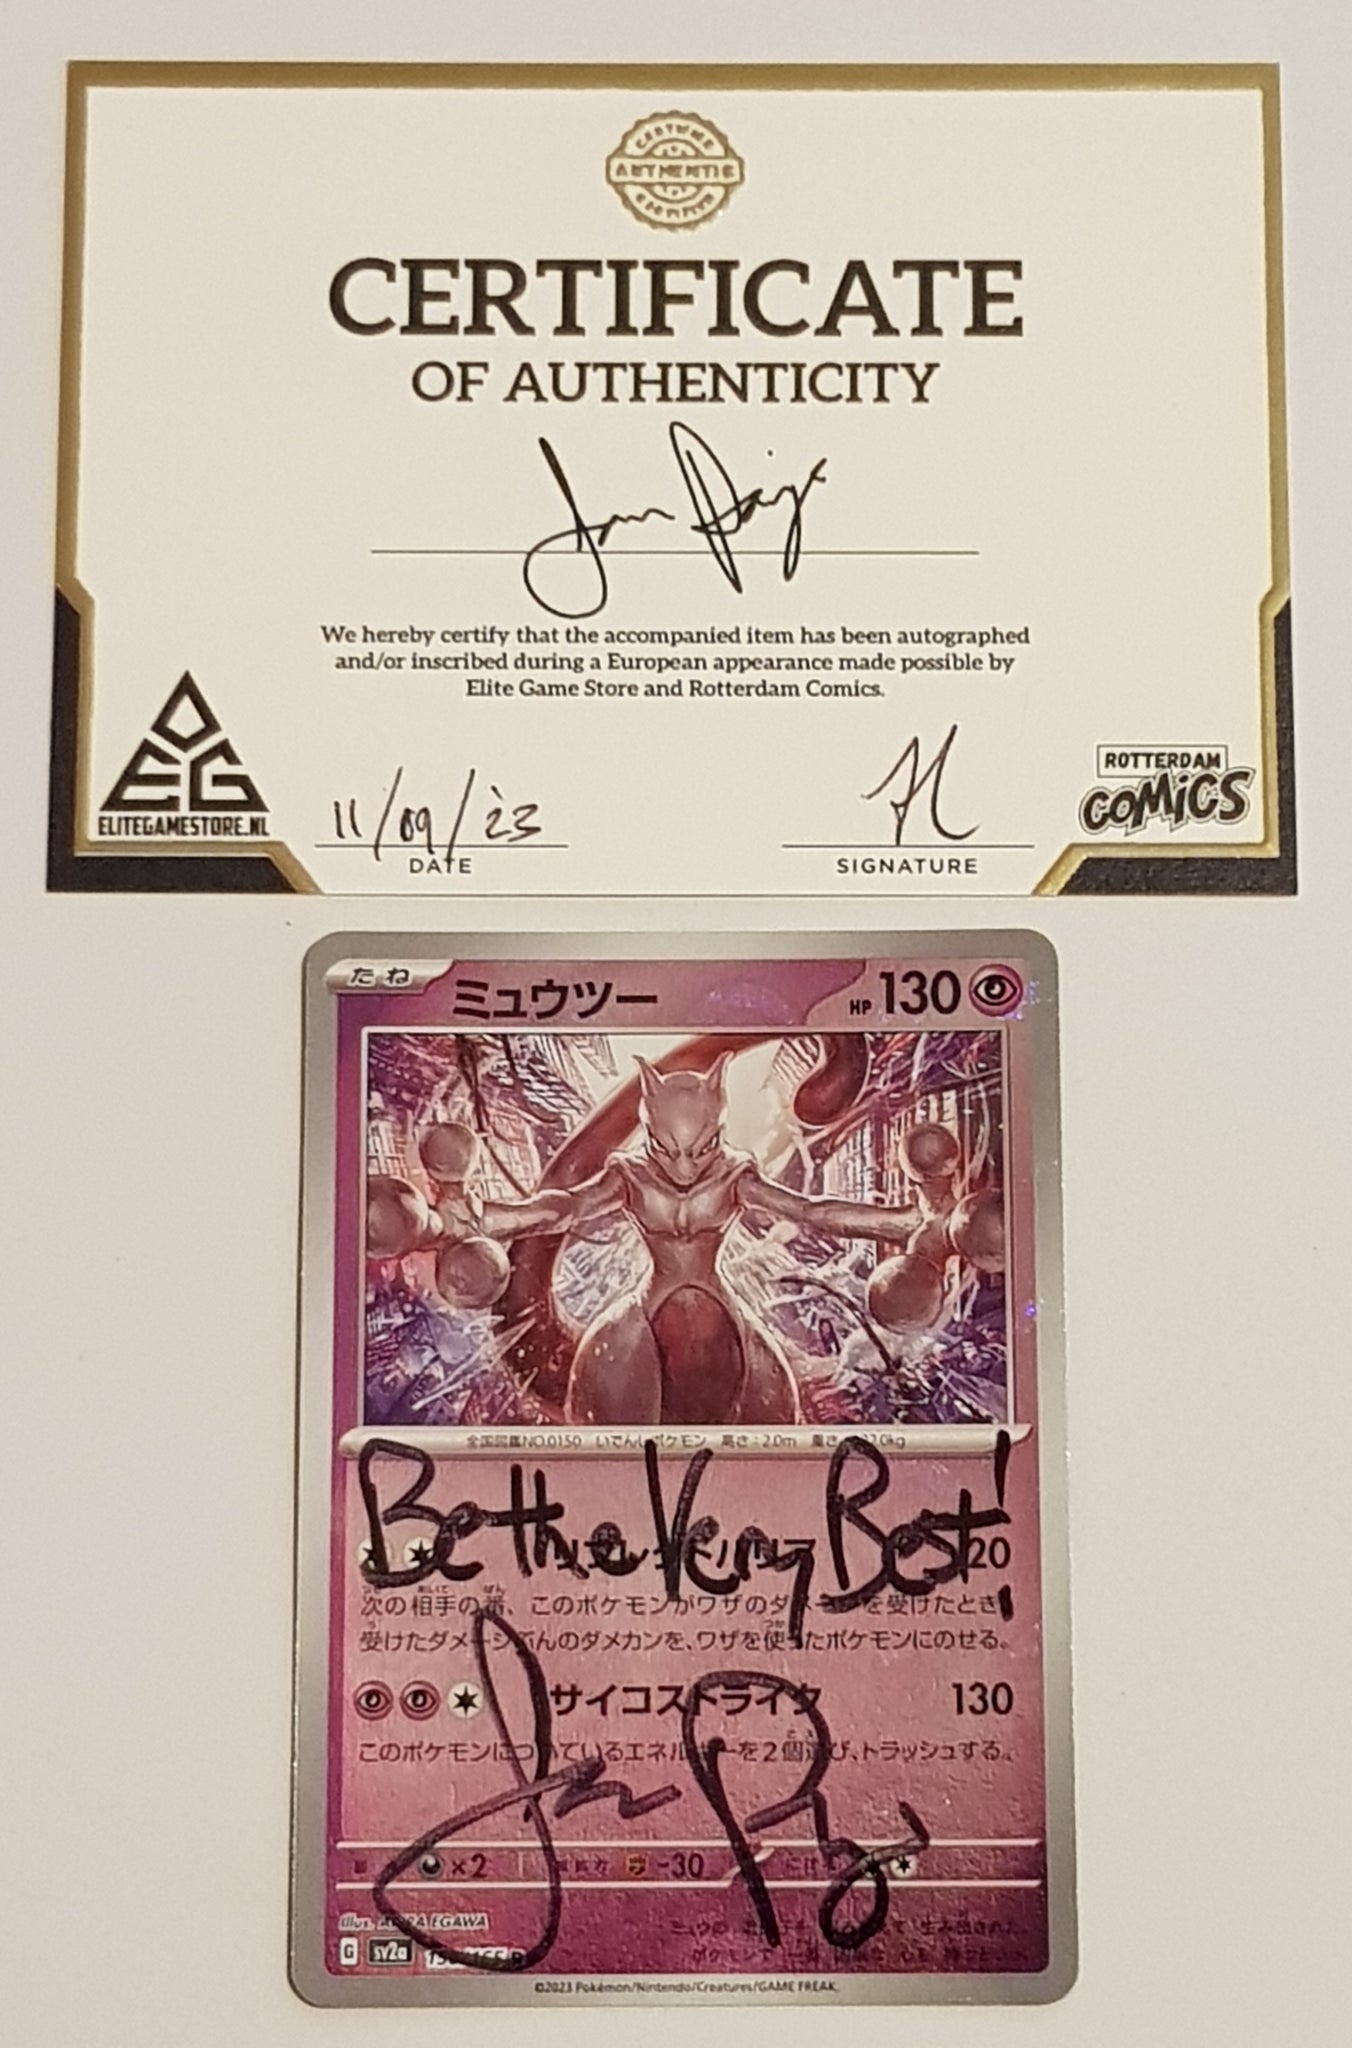 Pokemon Scarlet and Violet 151 Mewtwo #150/165 Japanese Pokeball Holo Variation Trading Card (Signed by Jason Paige)